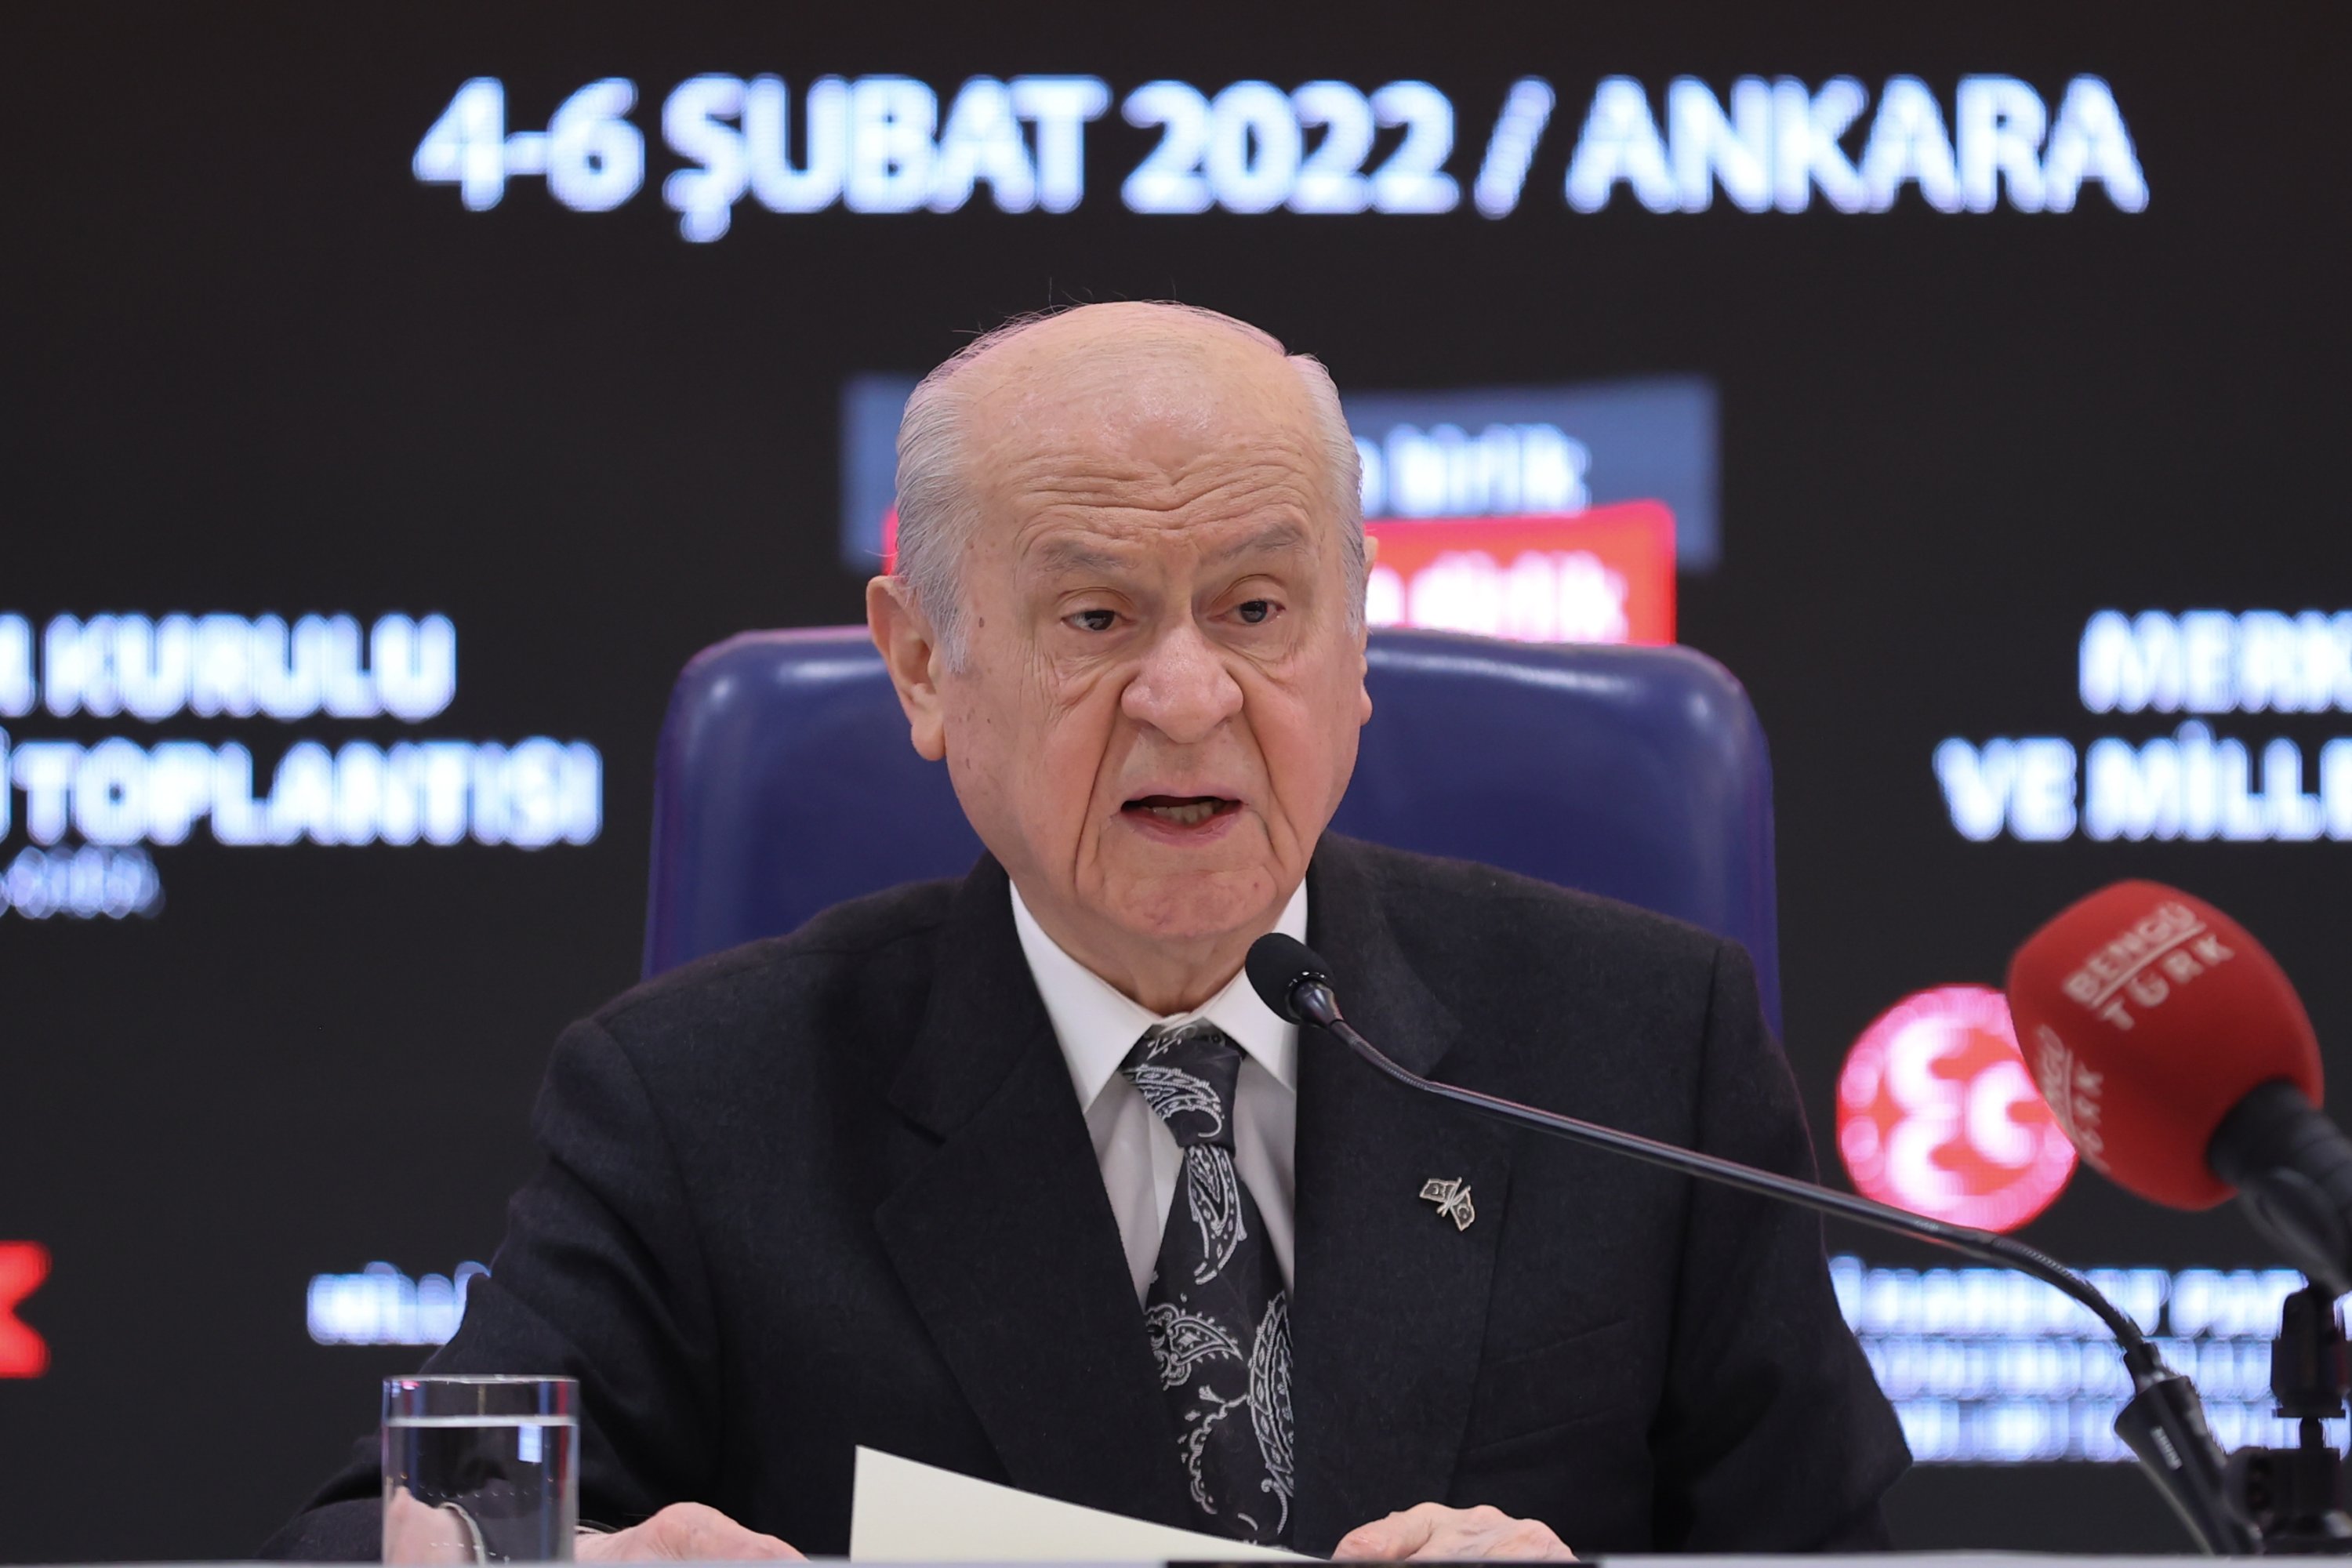 Next elections will be held in June 2023: MHP Chair Bahçeli | Daily Sabah